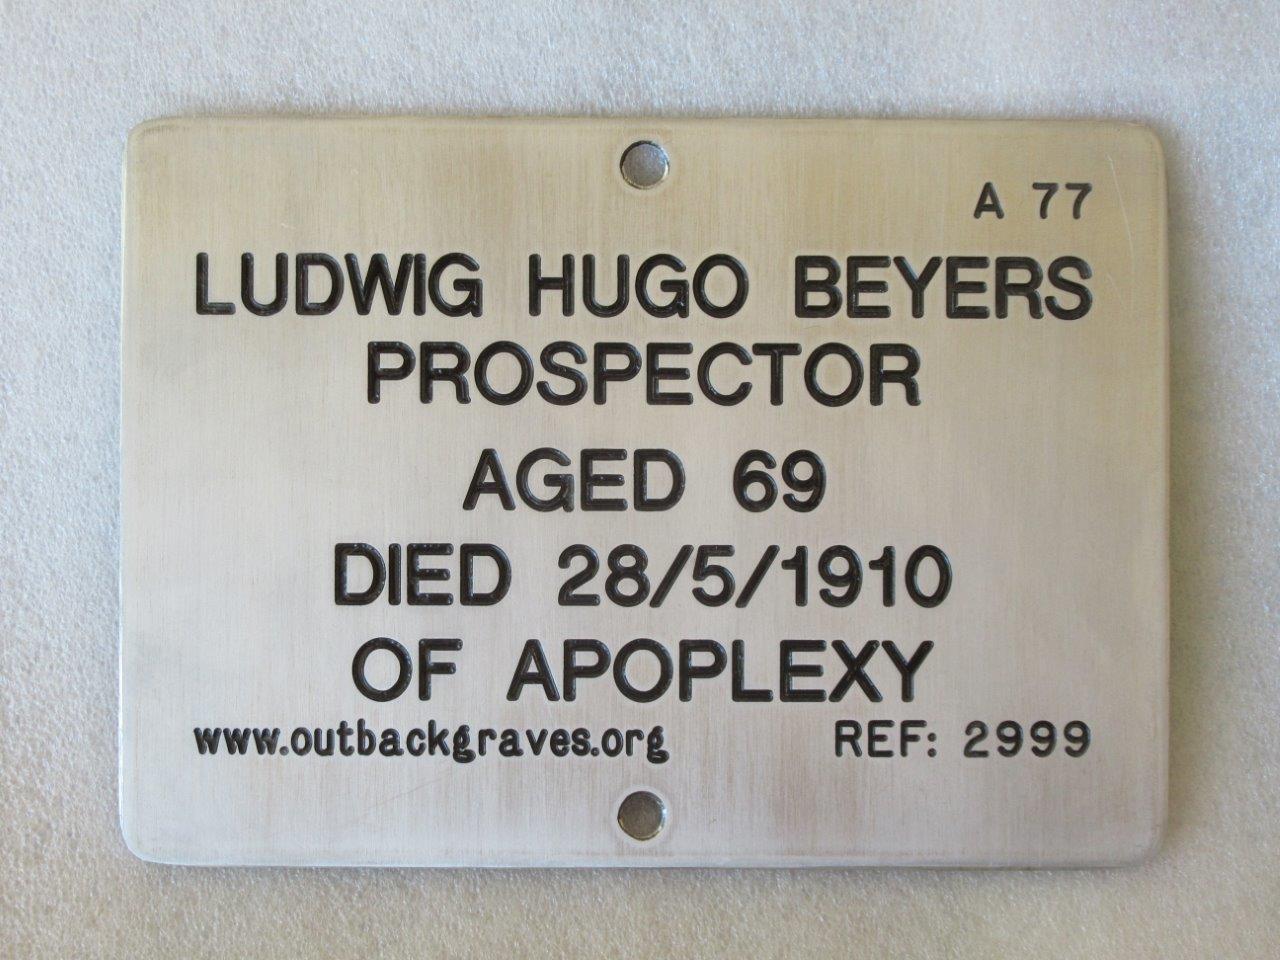 This is a photograph of plaque number 2999 for LUDWIG HUGO LOUIS BEYERS at Mt MORGANS